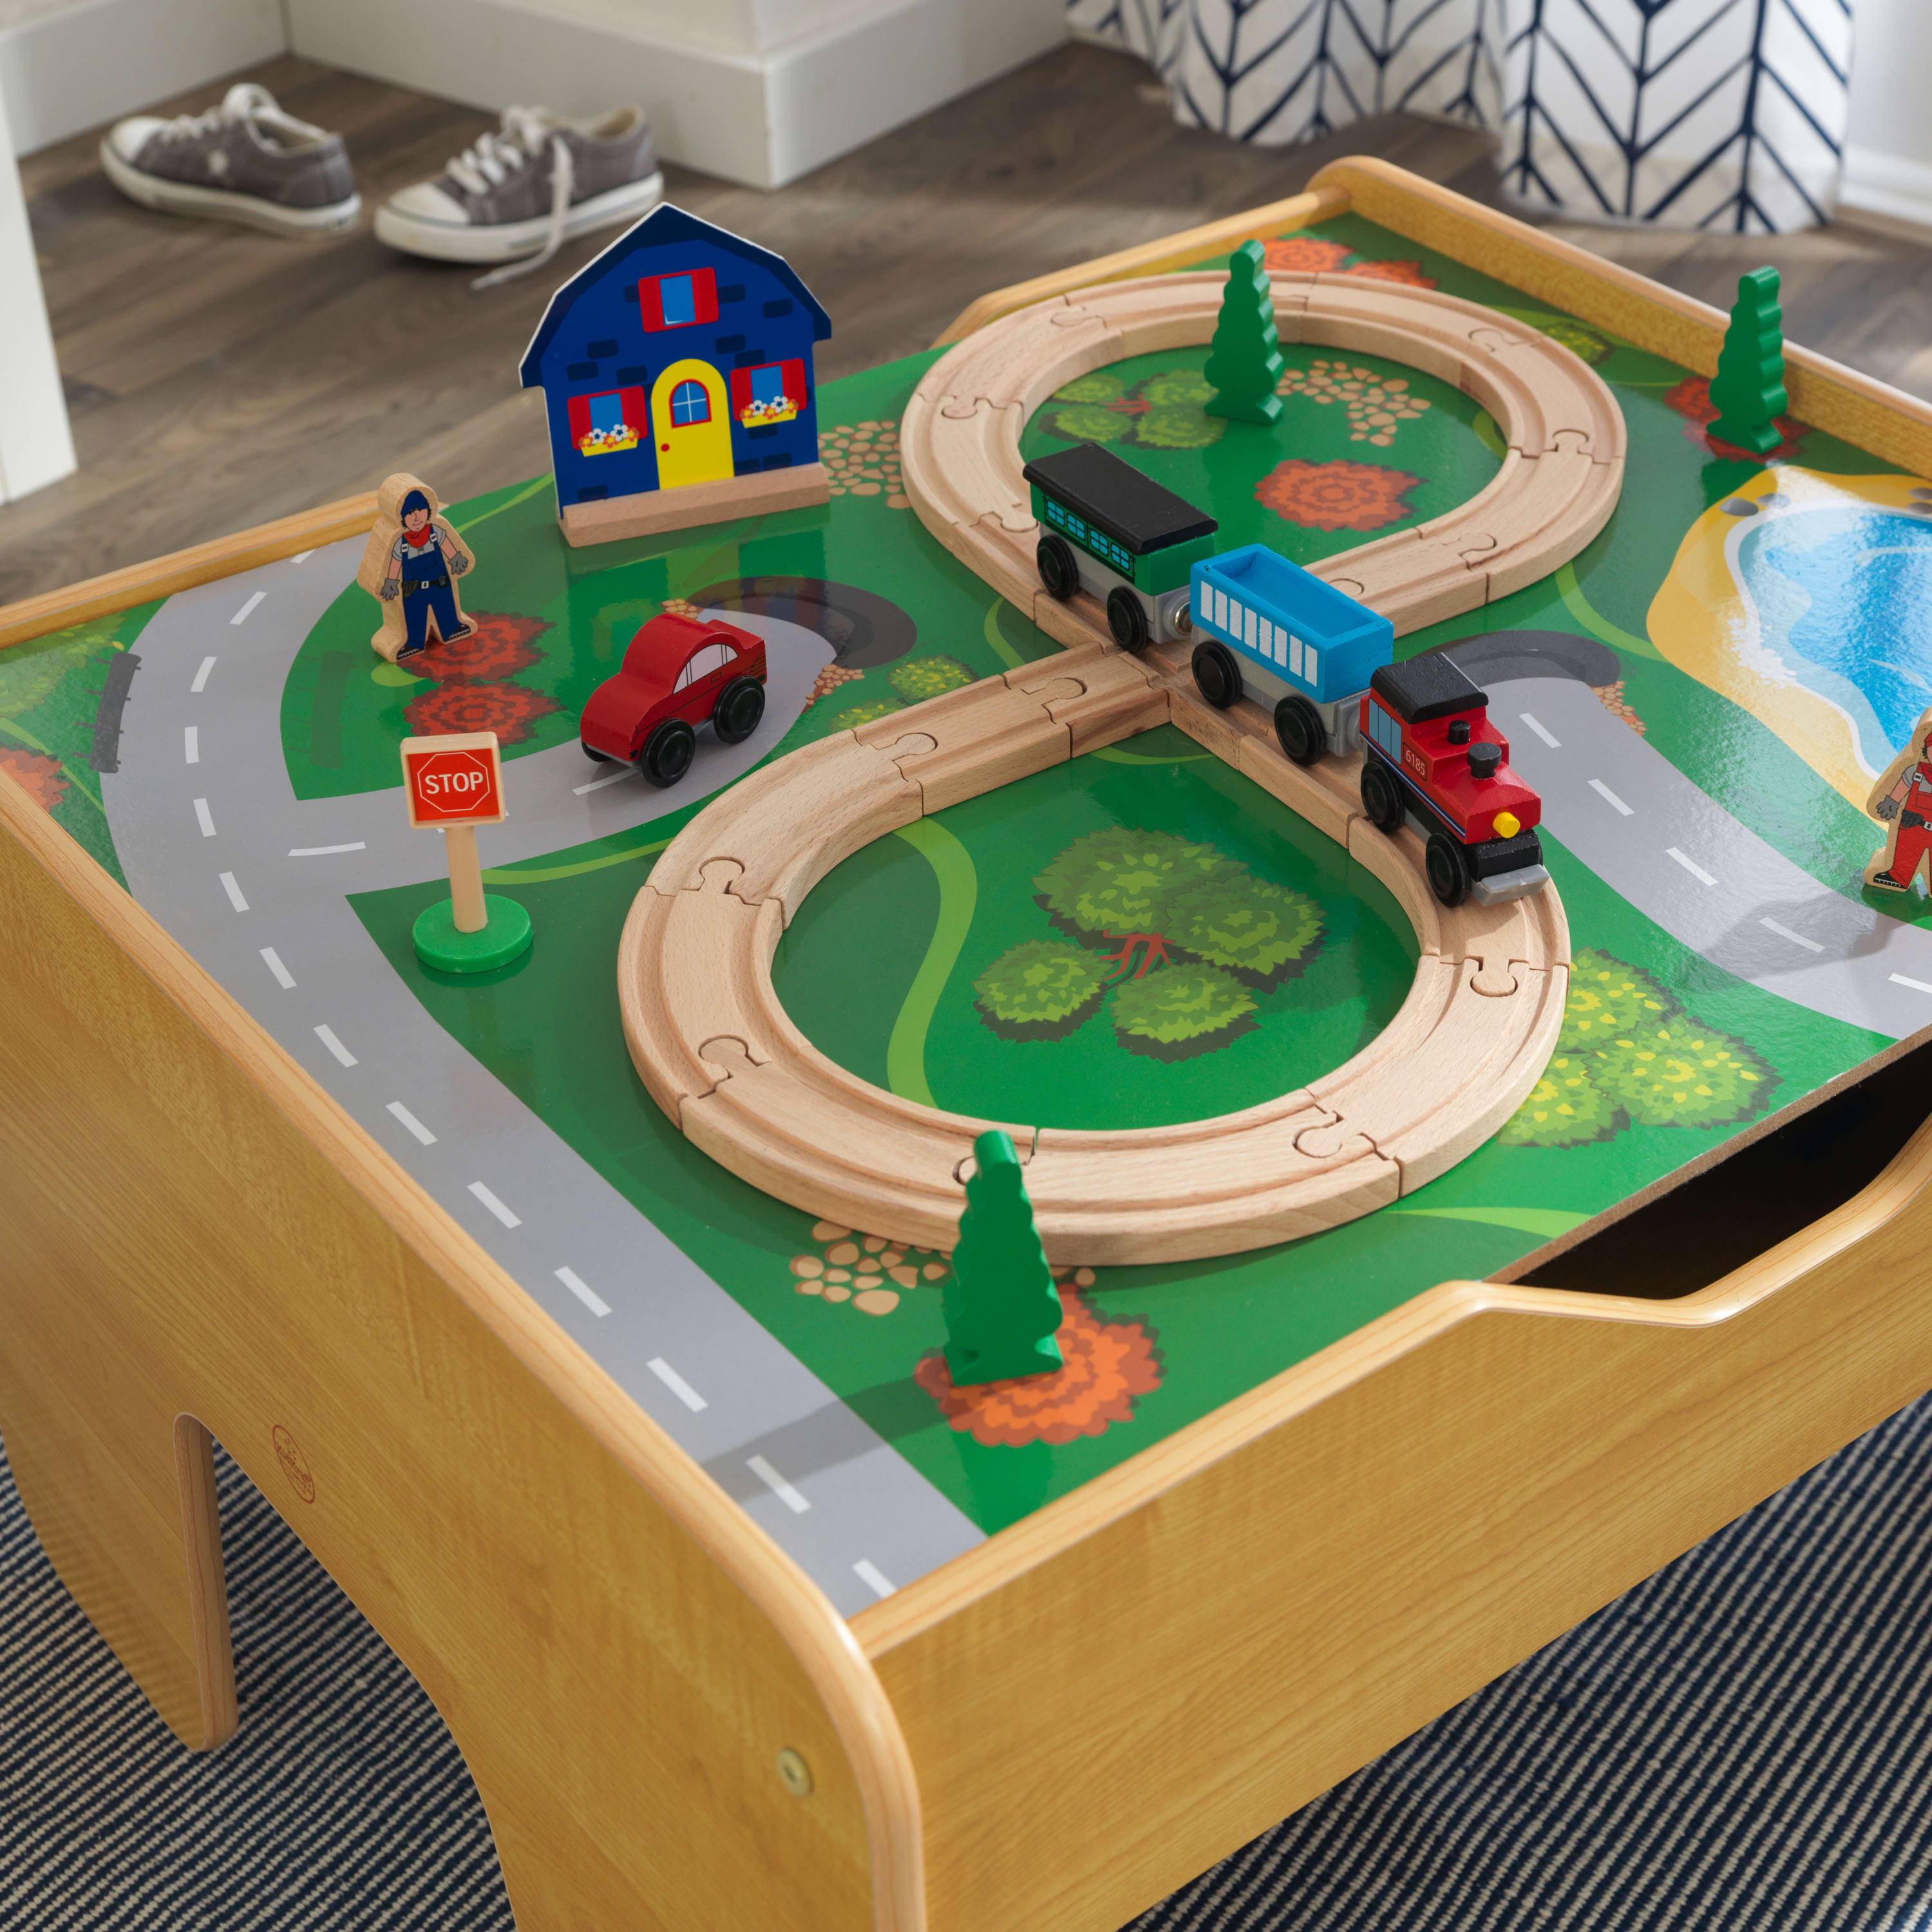 KidKraft Reversible Wooden Activity Table with Board and Train Set, Natural, for Ages 3+ Years - image 7 of 11